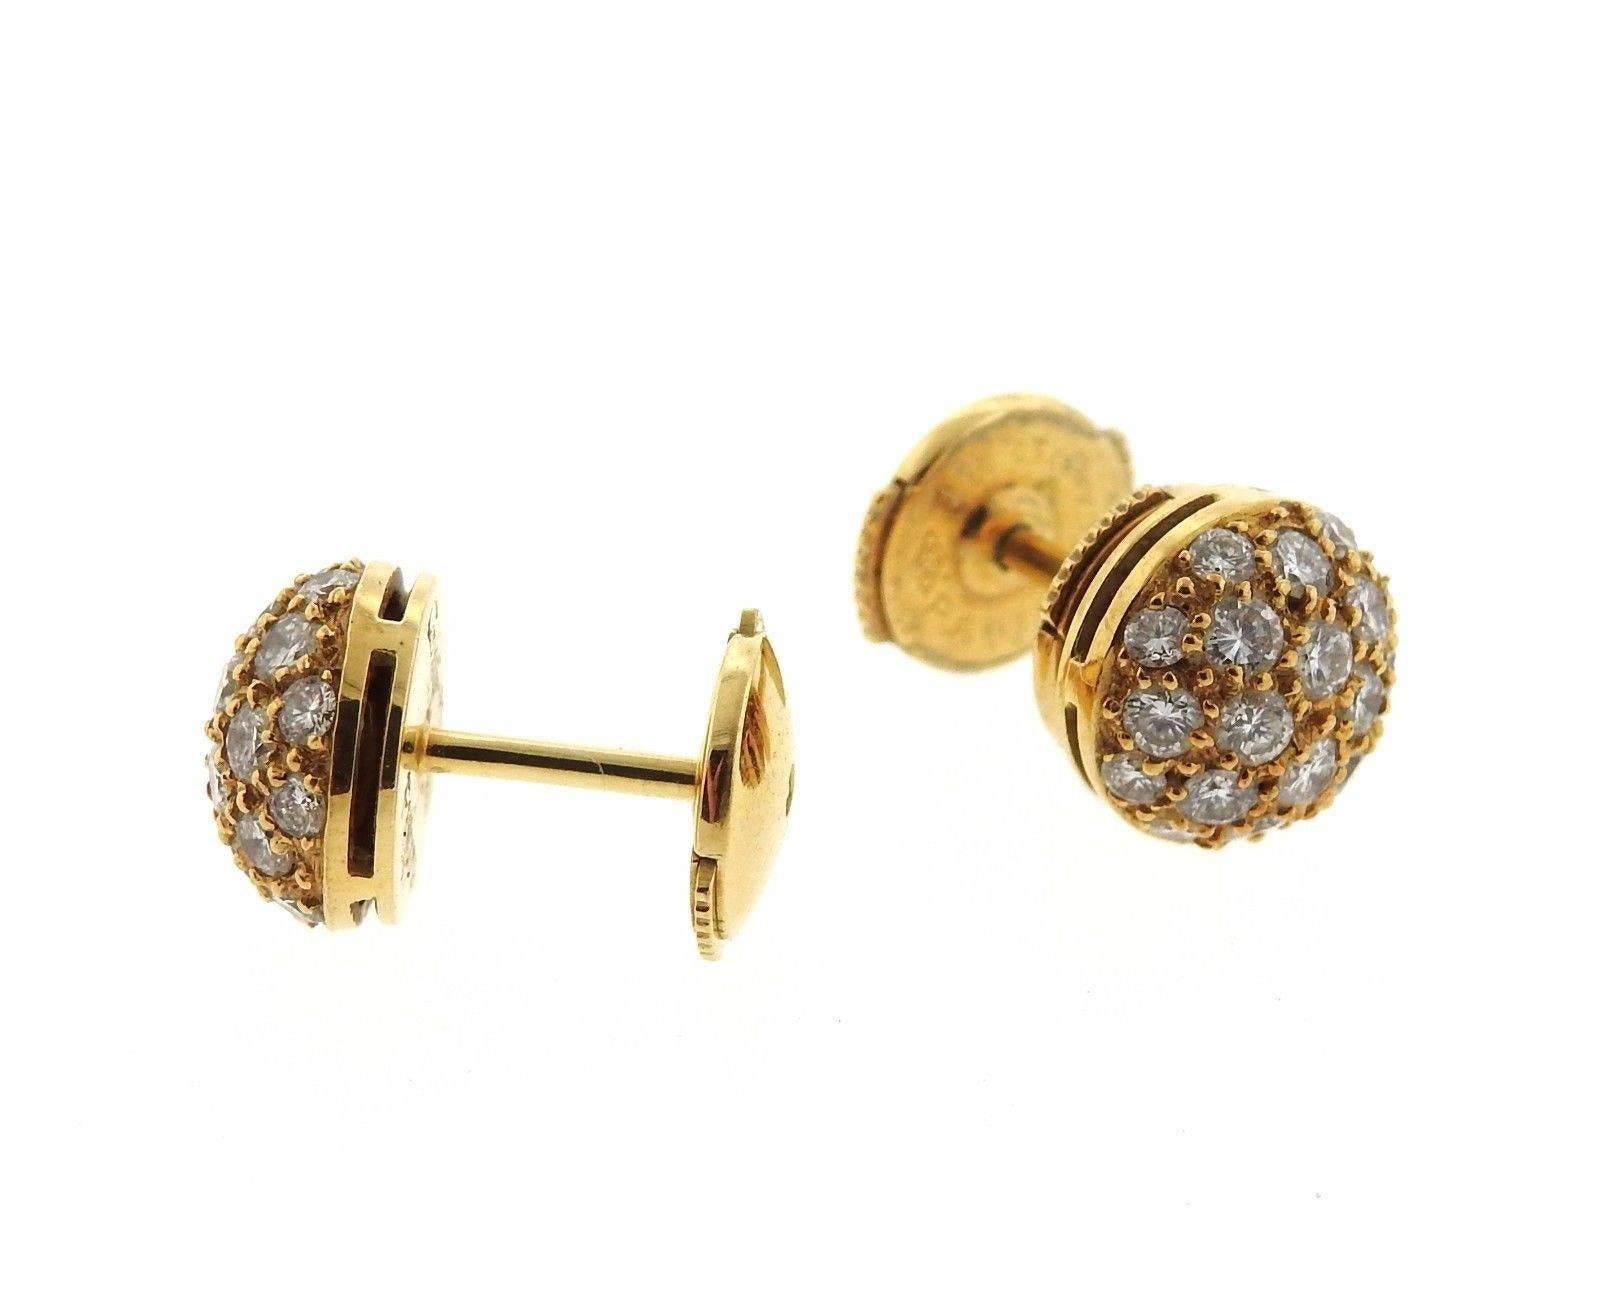 A pair of 18k yellow gold earrings set with approximately 1.50ctw of G/VS diamonds.  The earrings are 8.5mm in diameter and weigh 3.5 grams.  Marked: F19079, Cartier, 750.  Retail is $9500.